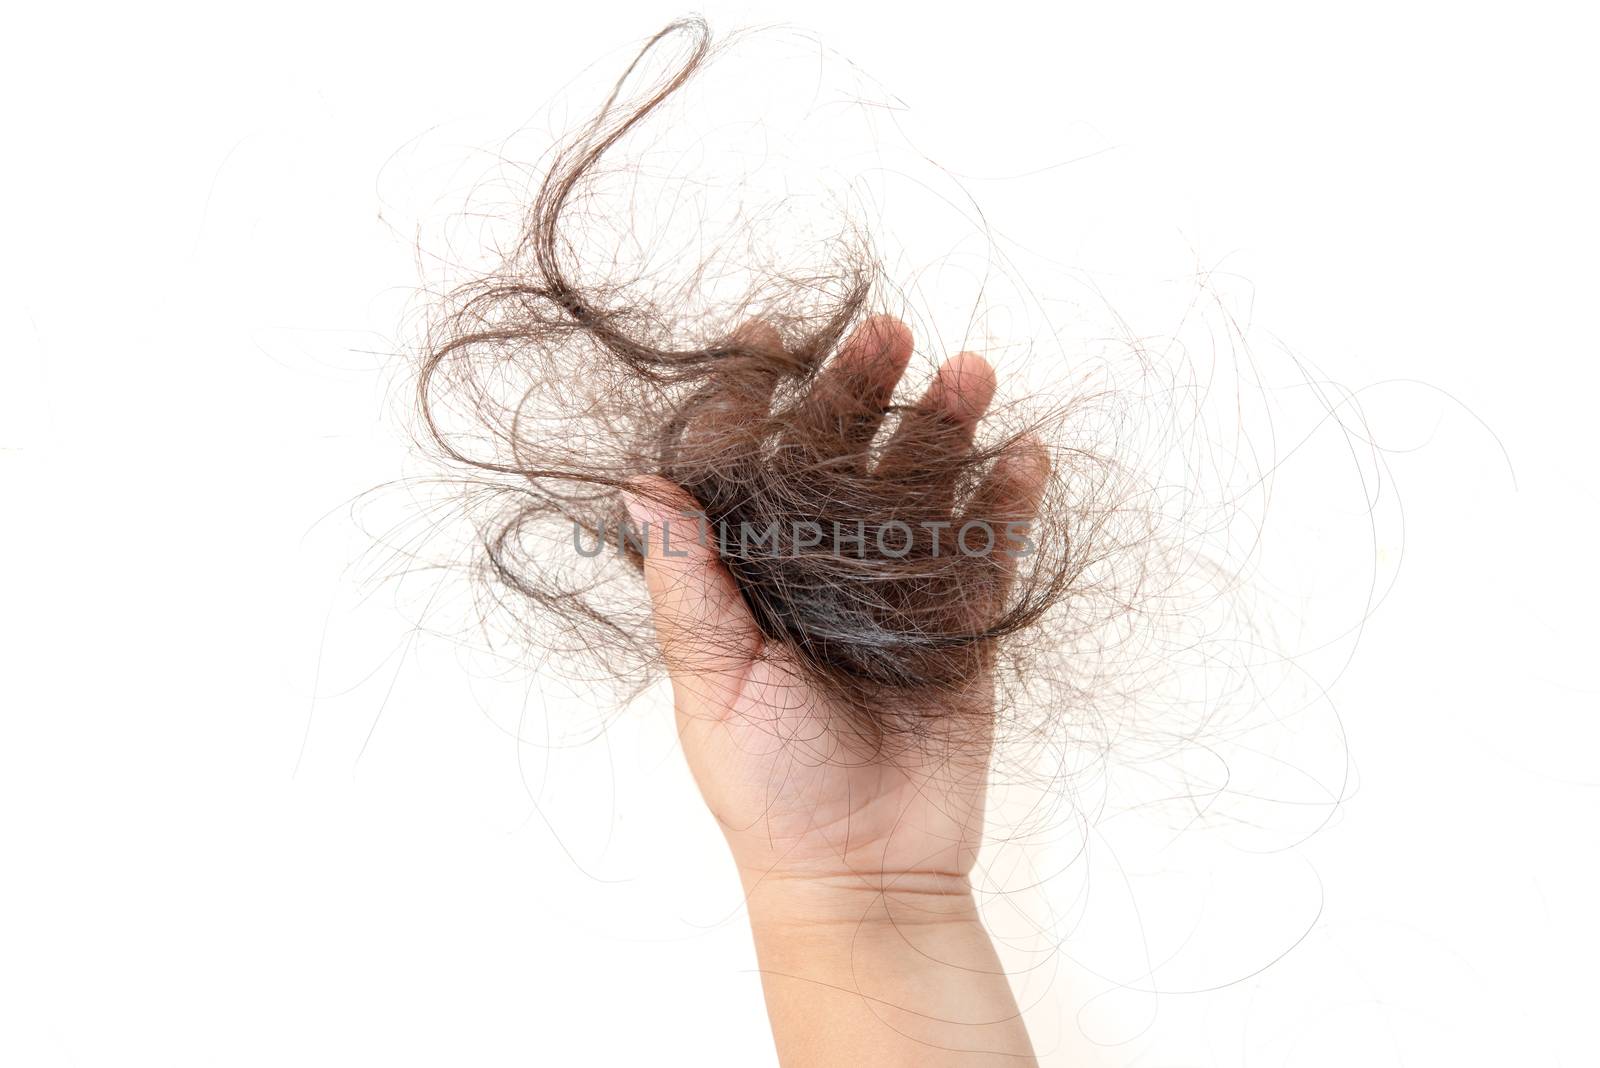 Child hand grabbing lost hair, isolated on white background.